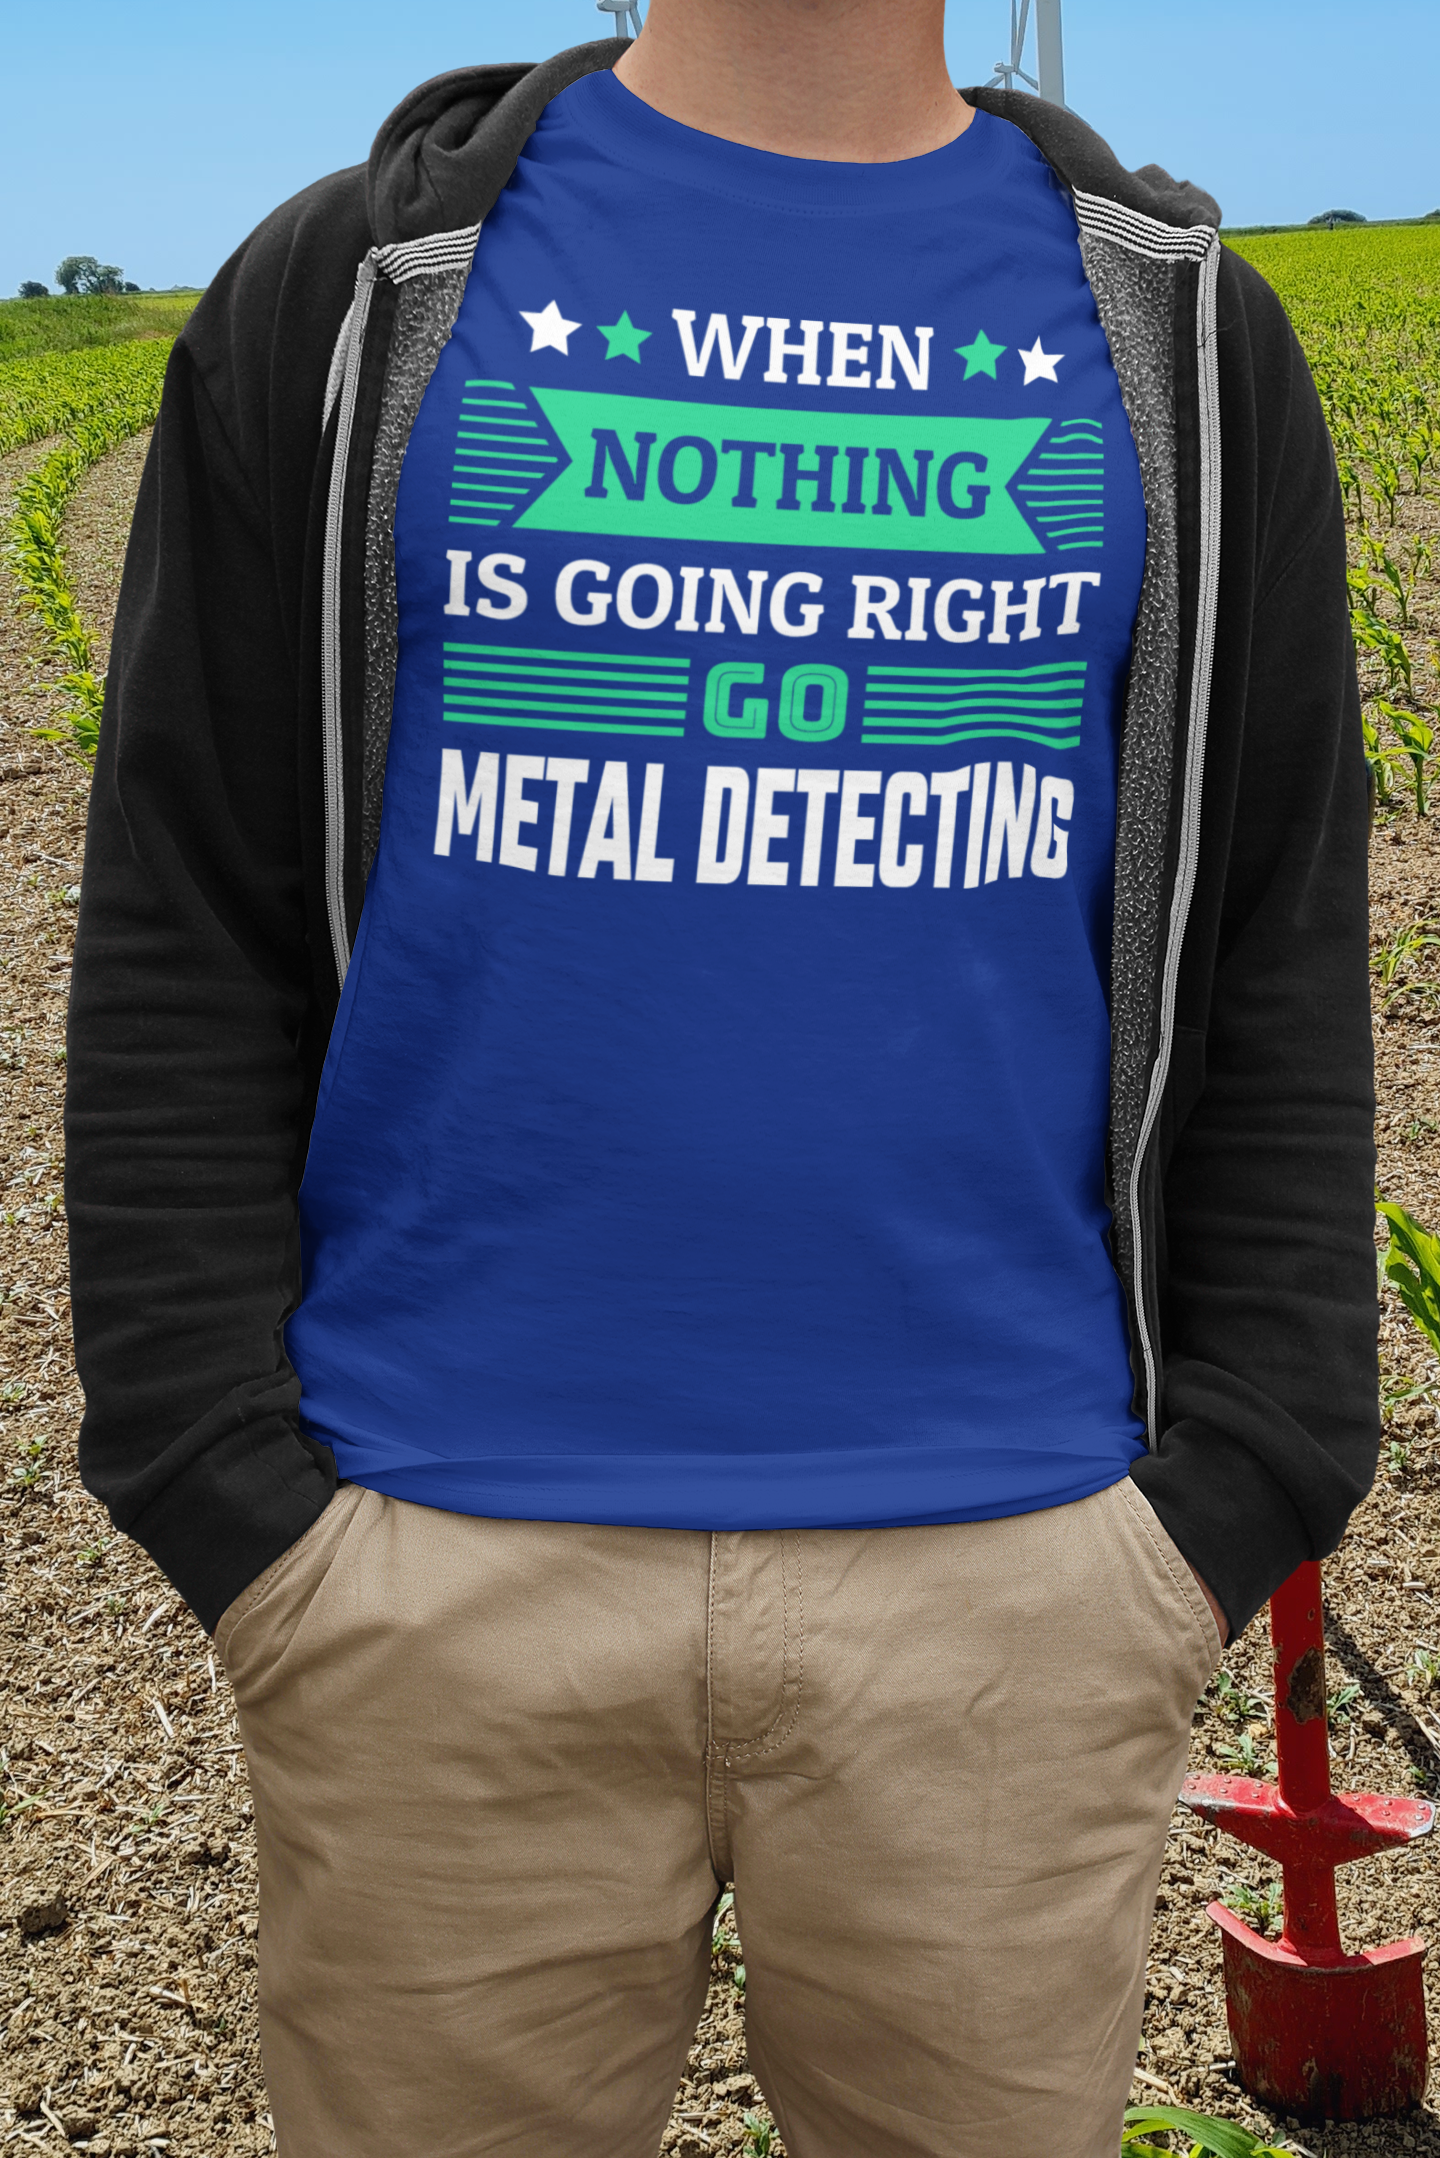 When nothing is going right go metal detecting